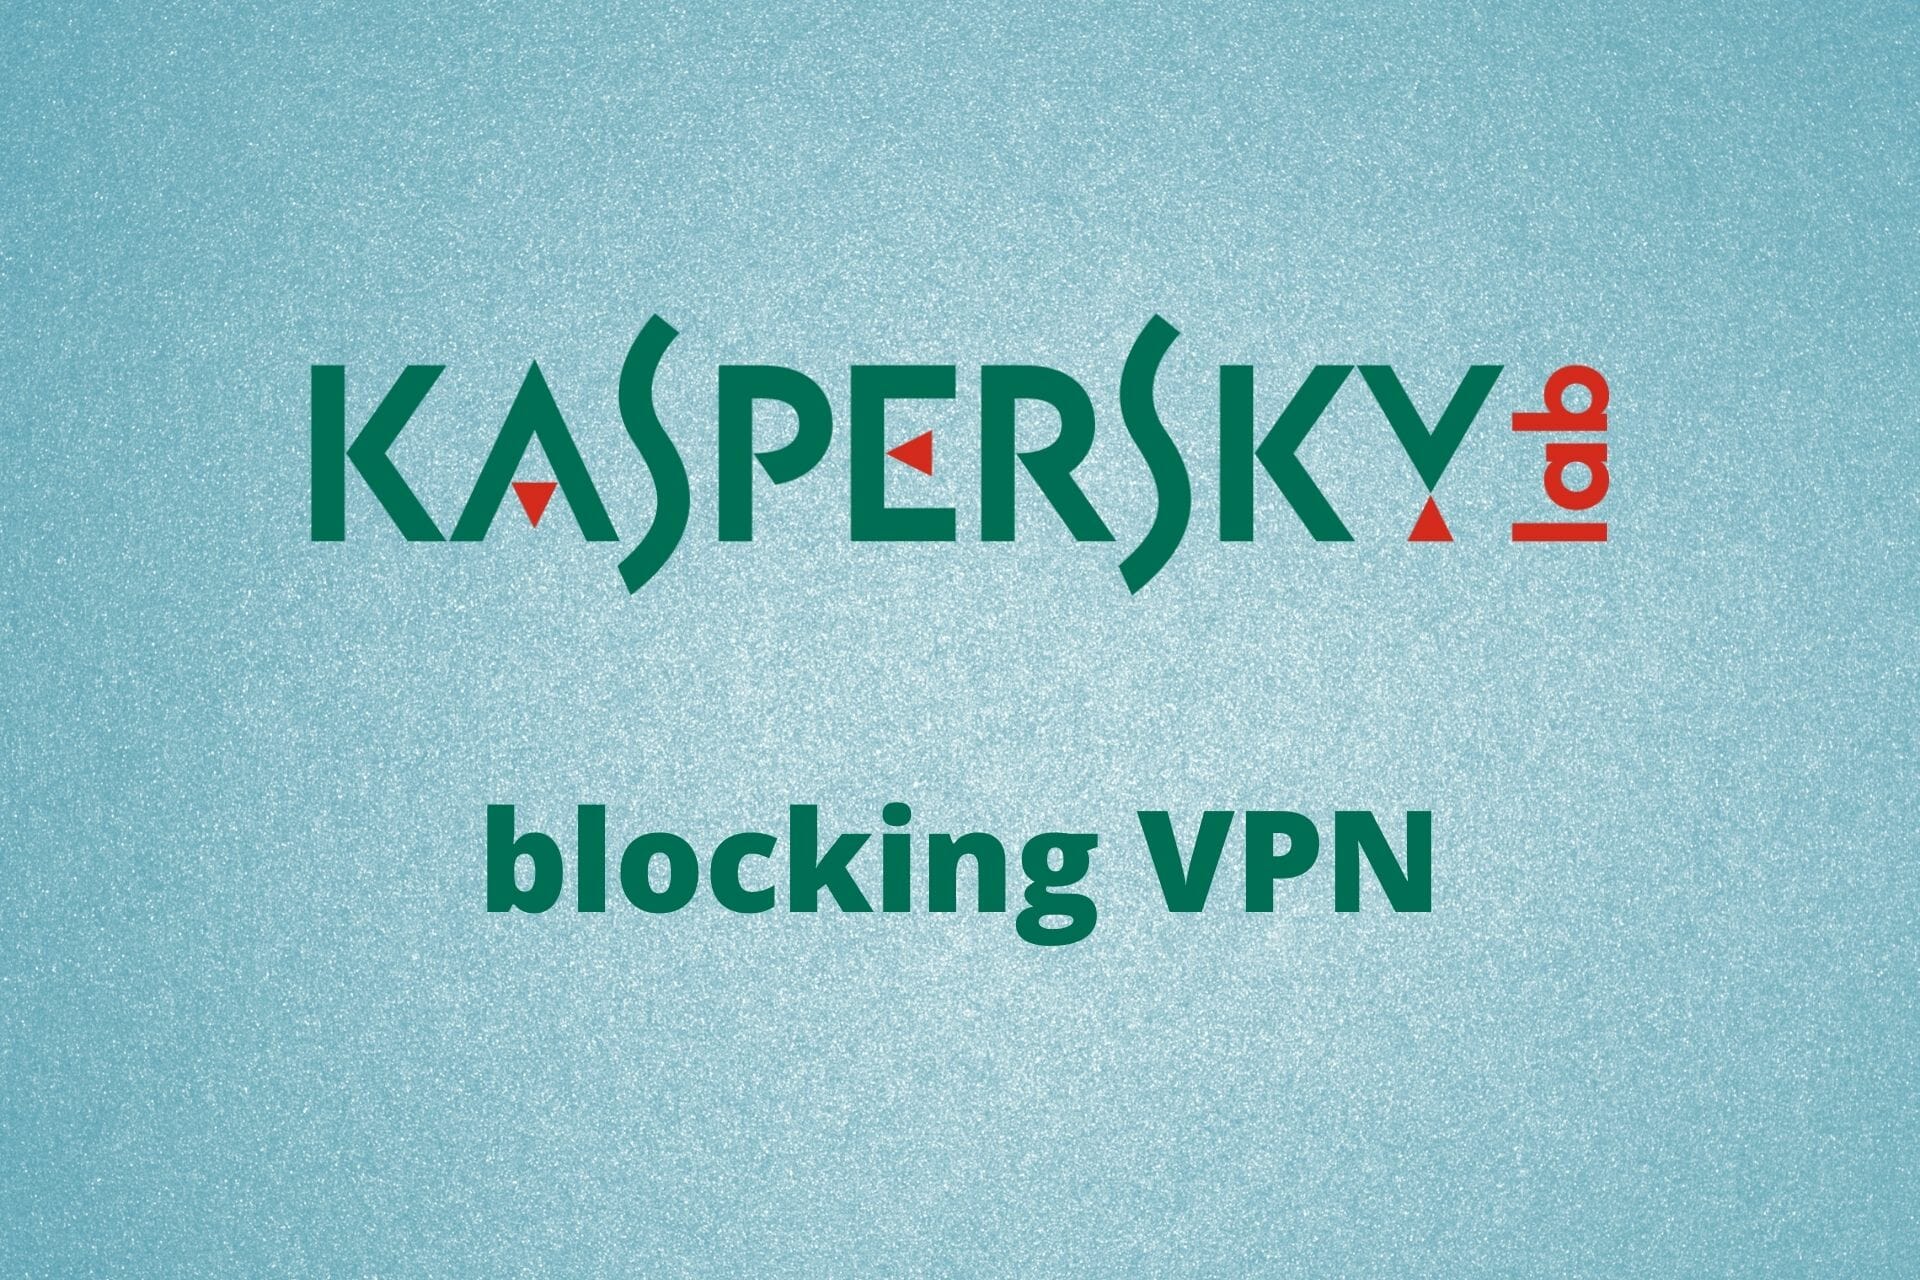 What to do if Kaspersky is blocking the VPN